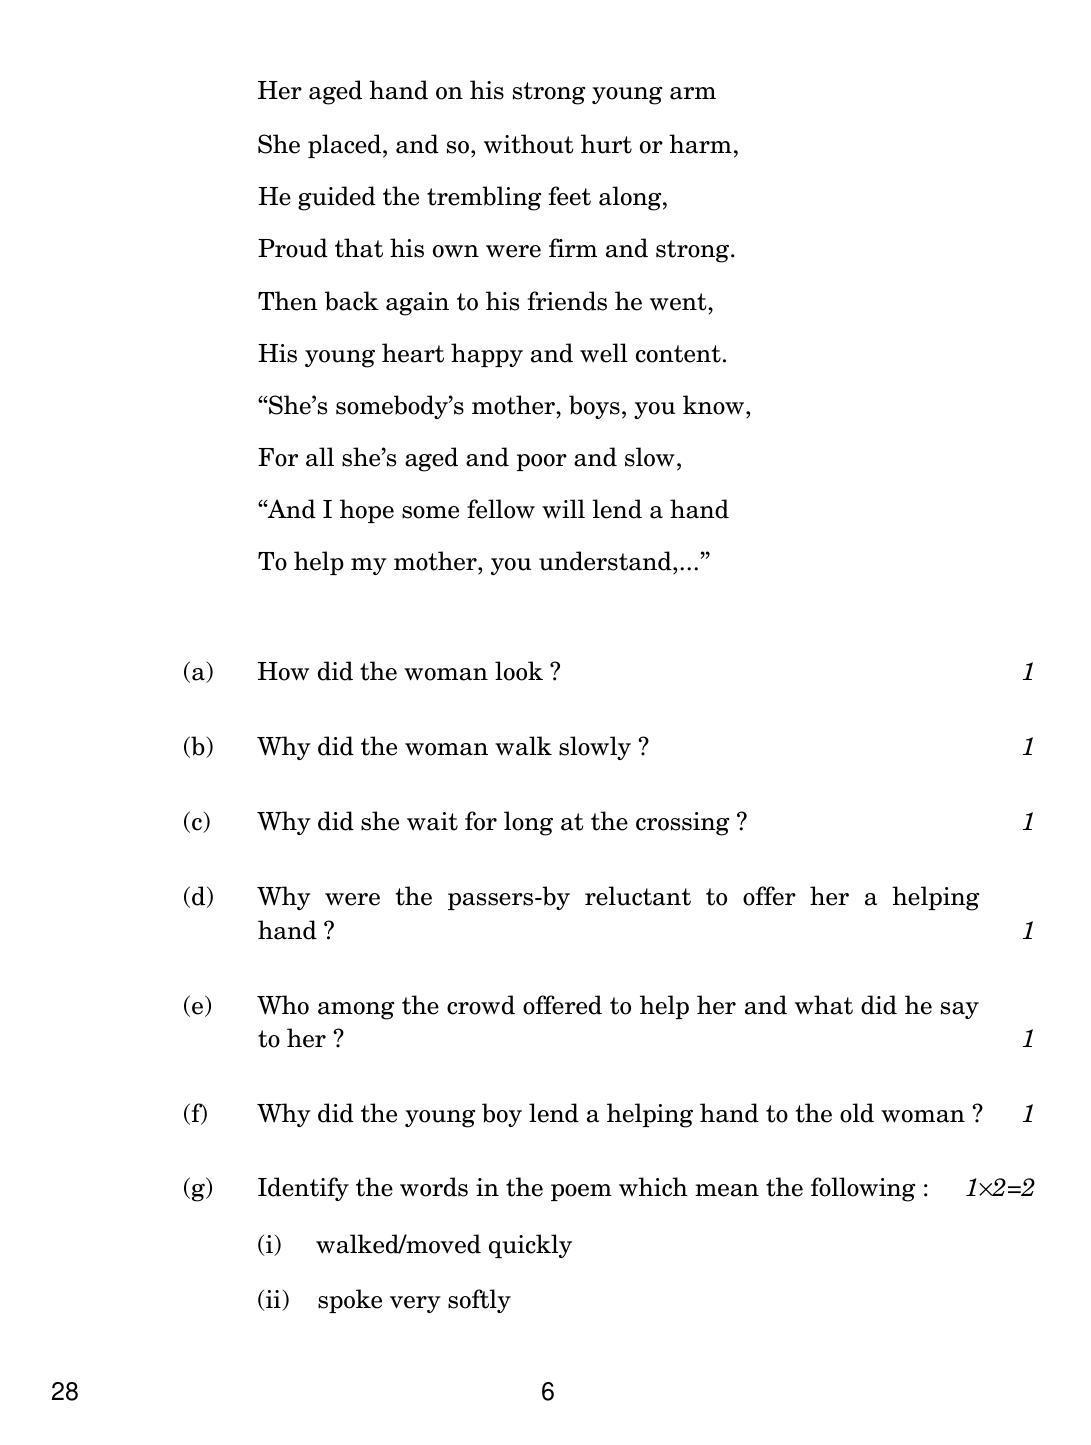 CBSE Class 12 28 ENGLISH ELECTIVE NCERT 2018 Question Paper - Page 6